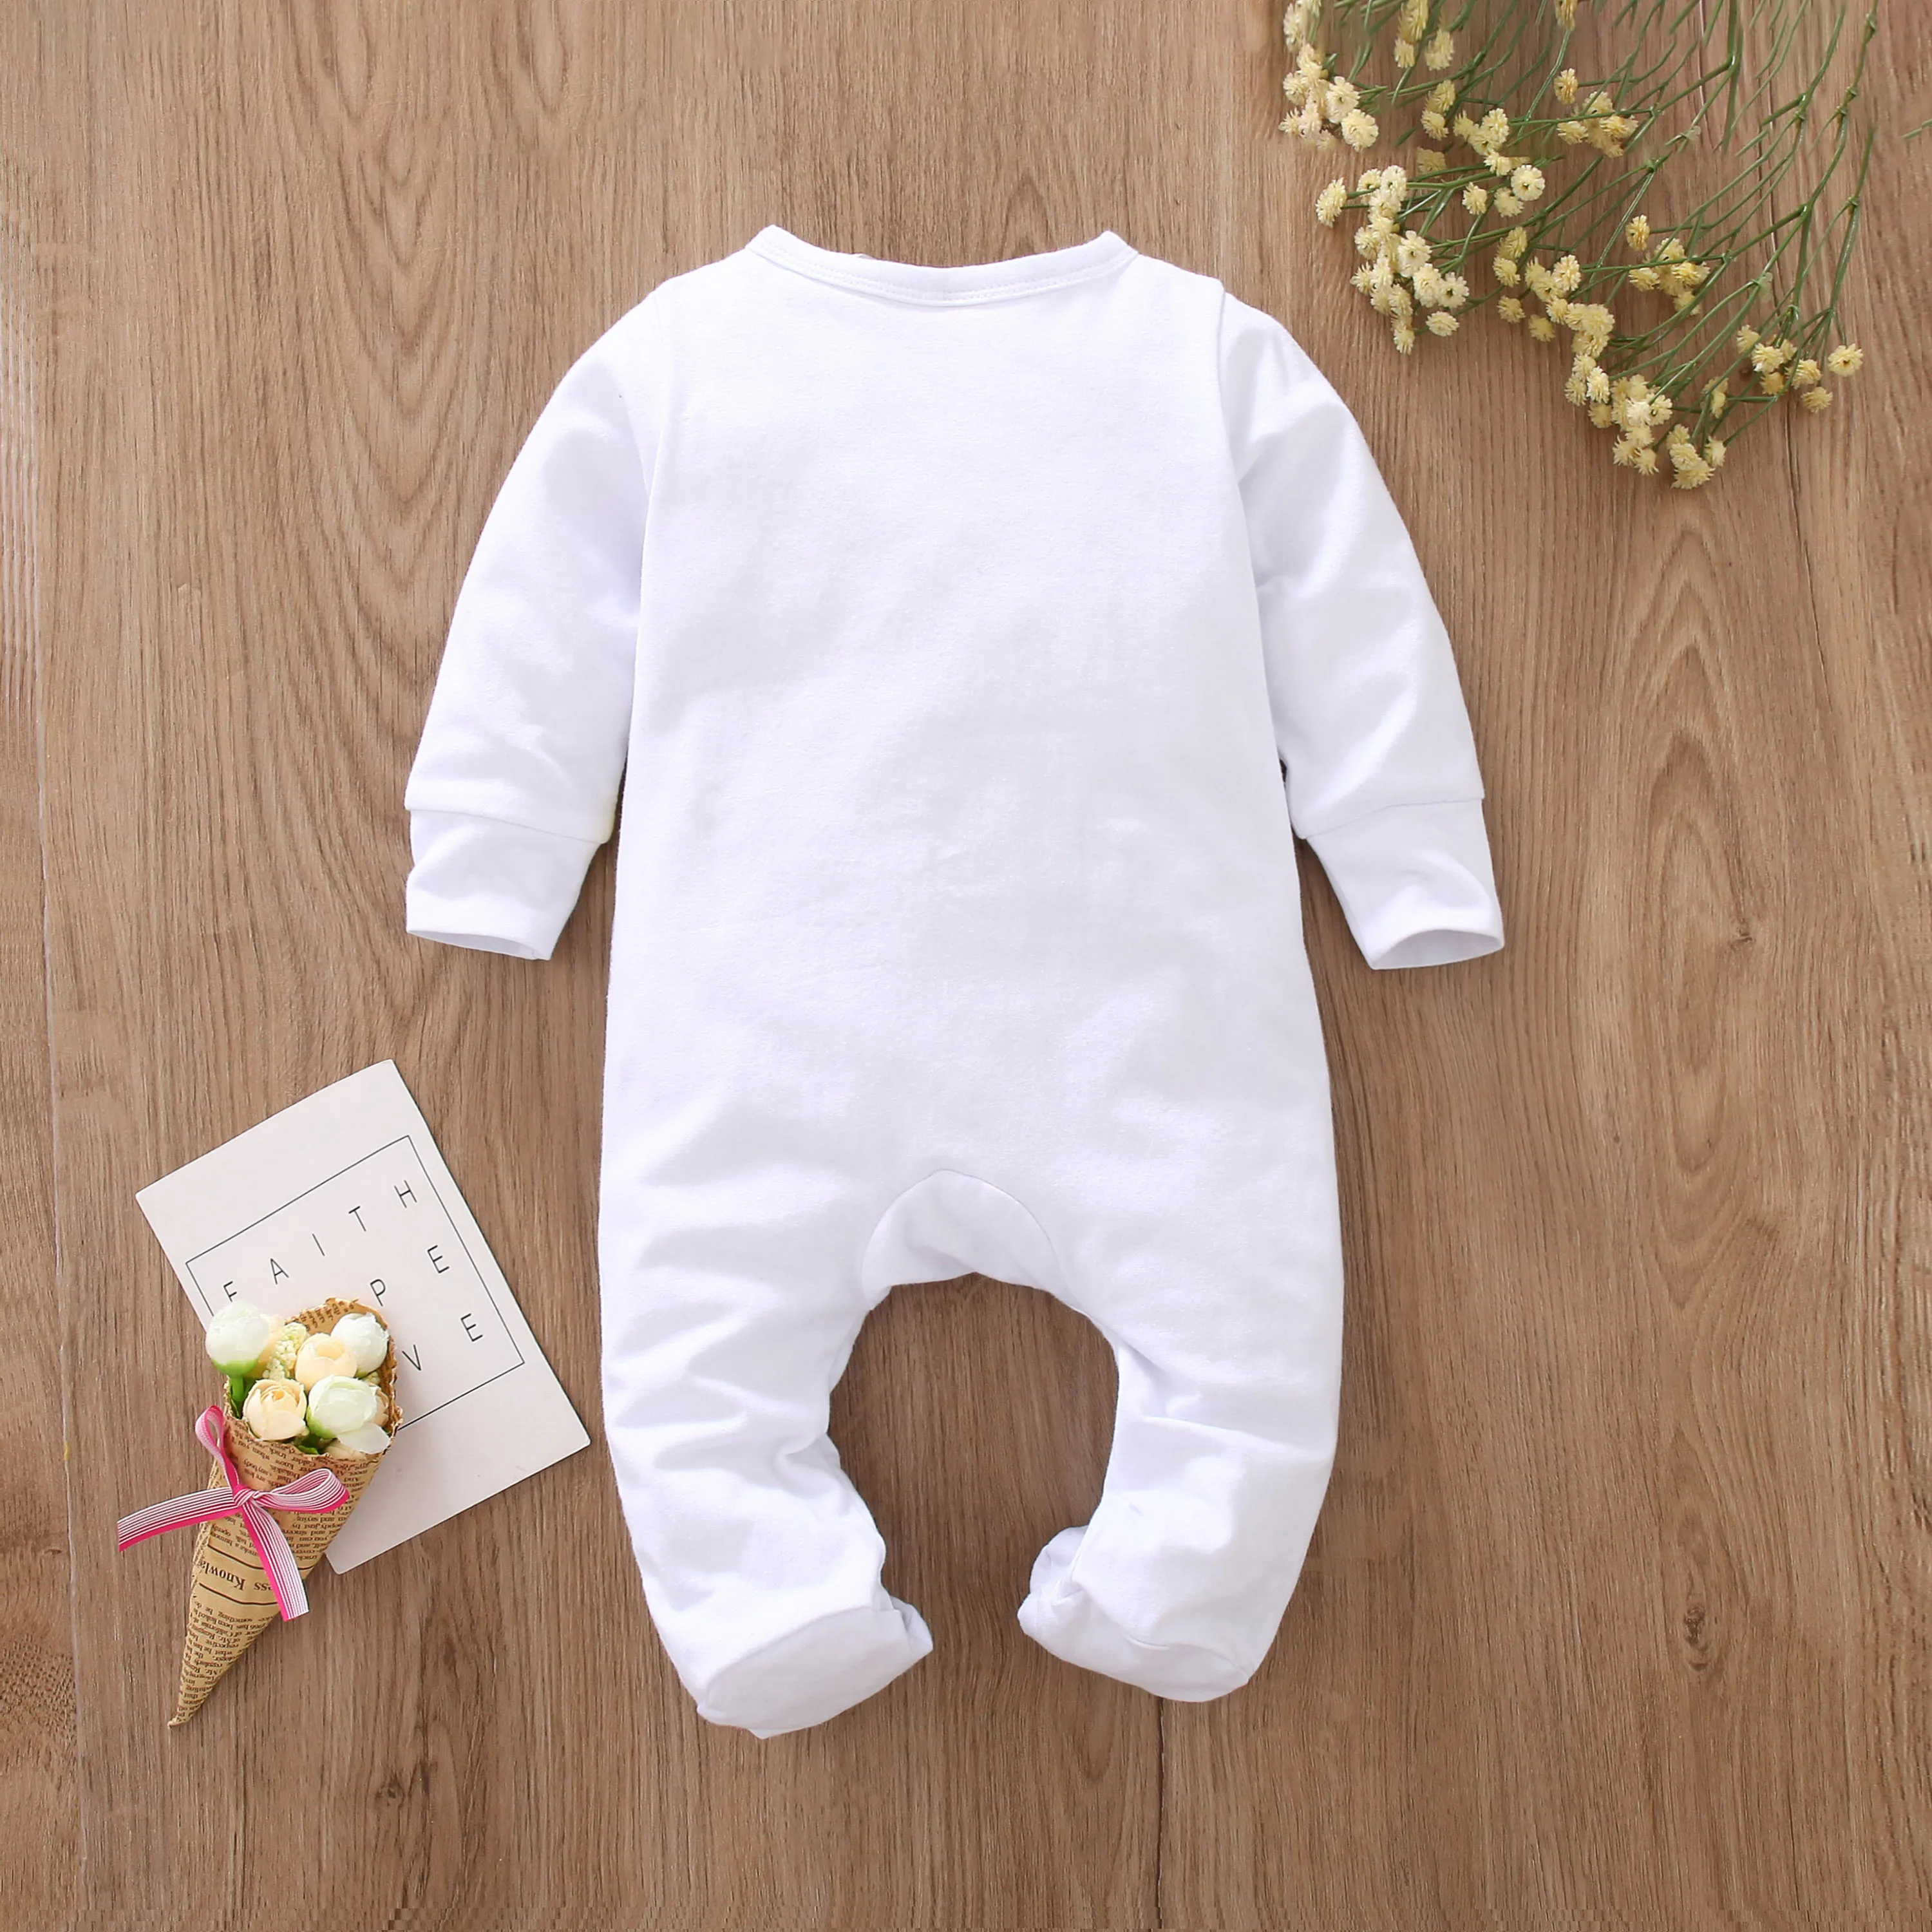 baby bodysuit dress Newborn Baby Boy Girl Romper Long Sleeve Cotton Letter I Love Daddy & Mummy Animal Print Jumpsuit Infant Pajama Outfits Bamboo fiber children's clothes